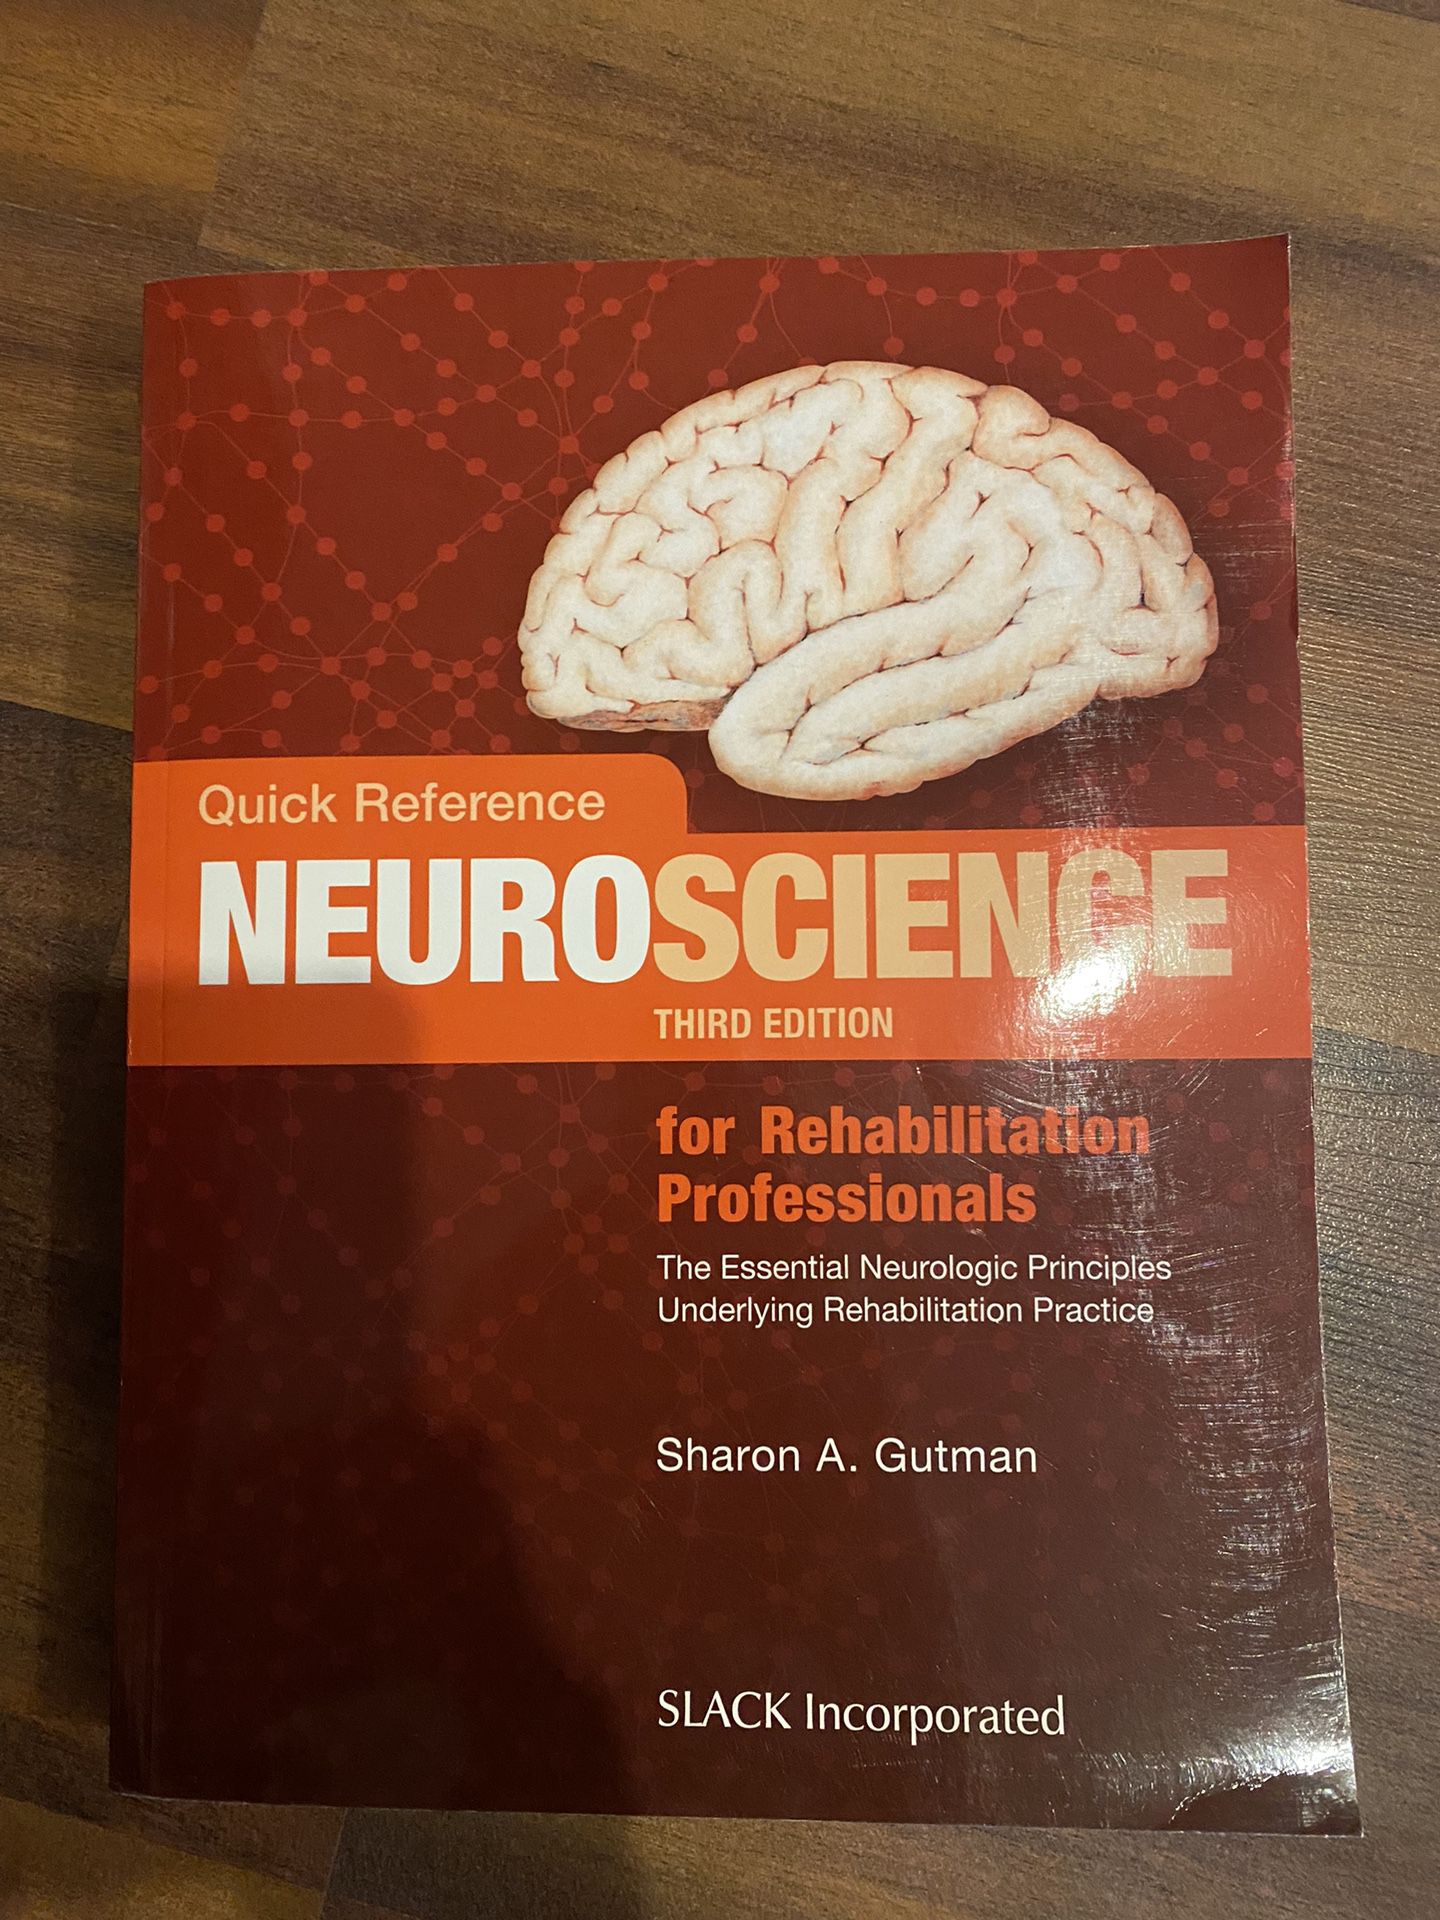 Textbook Quick Reference Neuroscience 